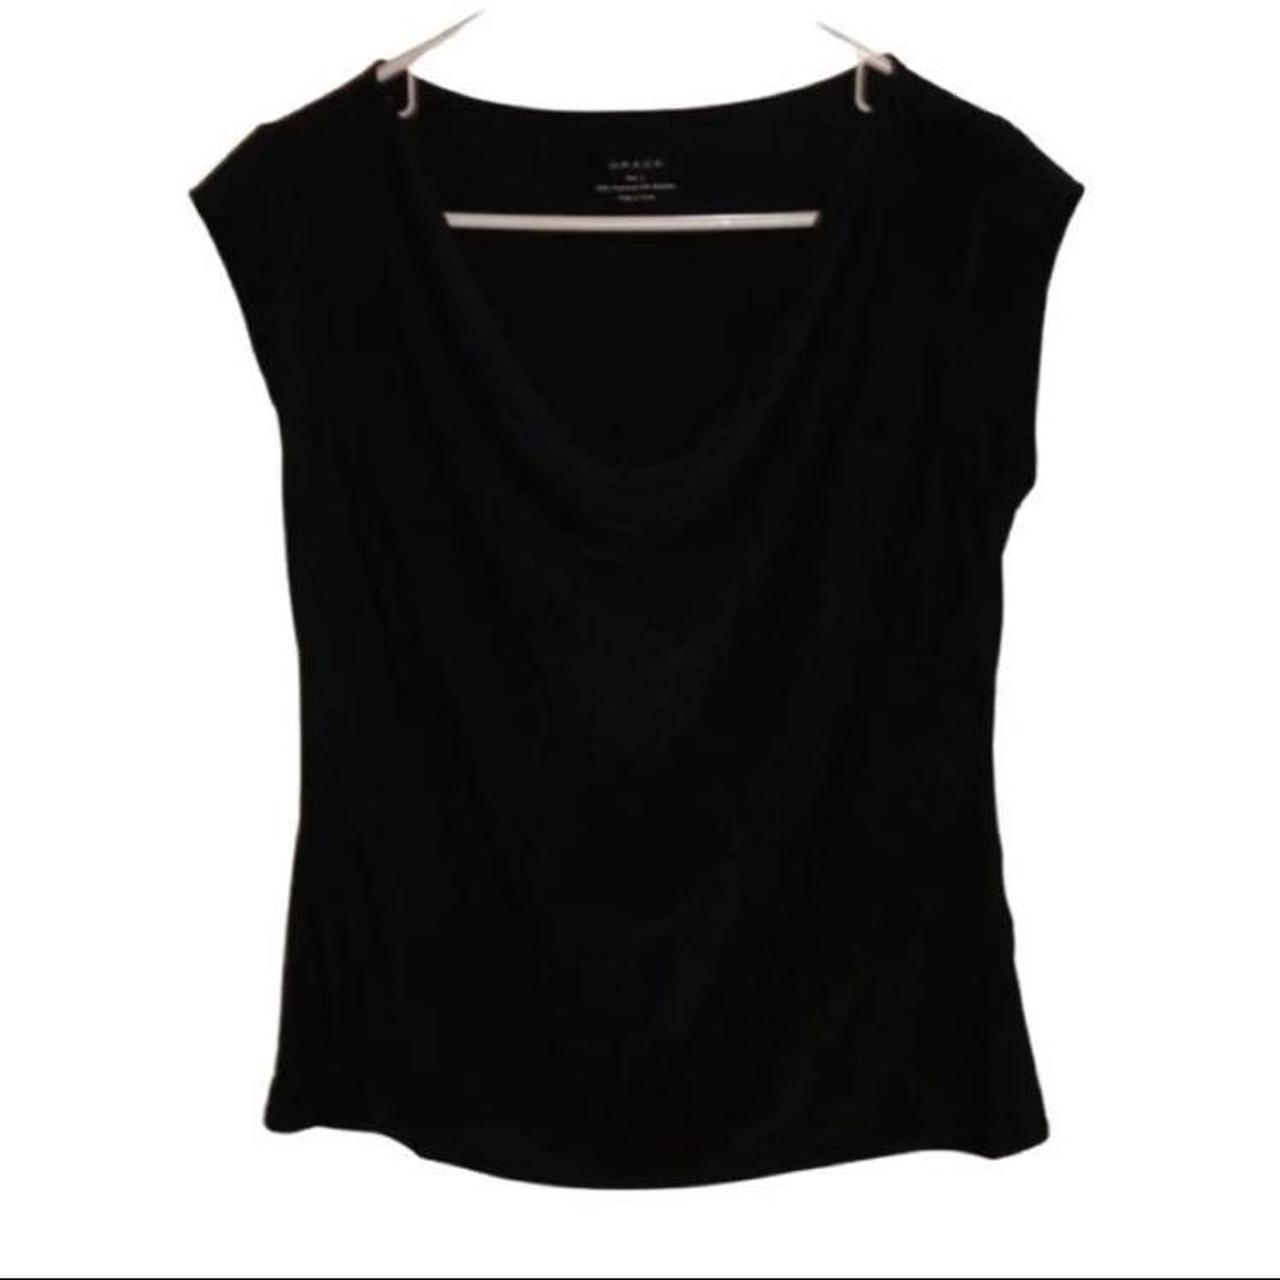 Product Image 1 - Blouse by Grace
Size: Large
Draped Front
Black